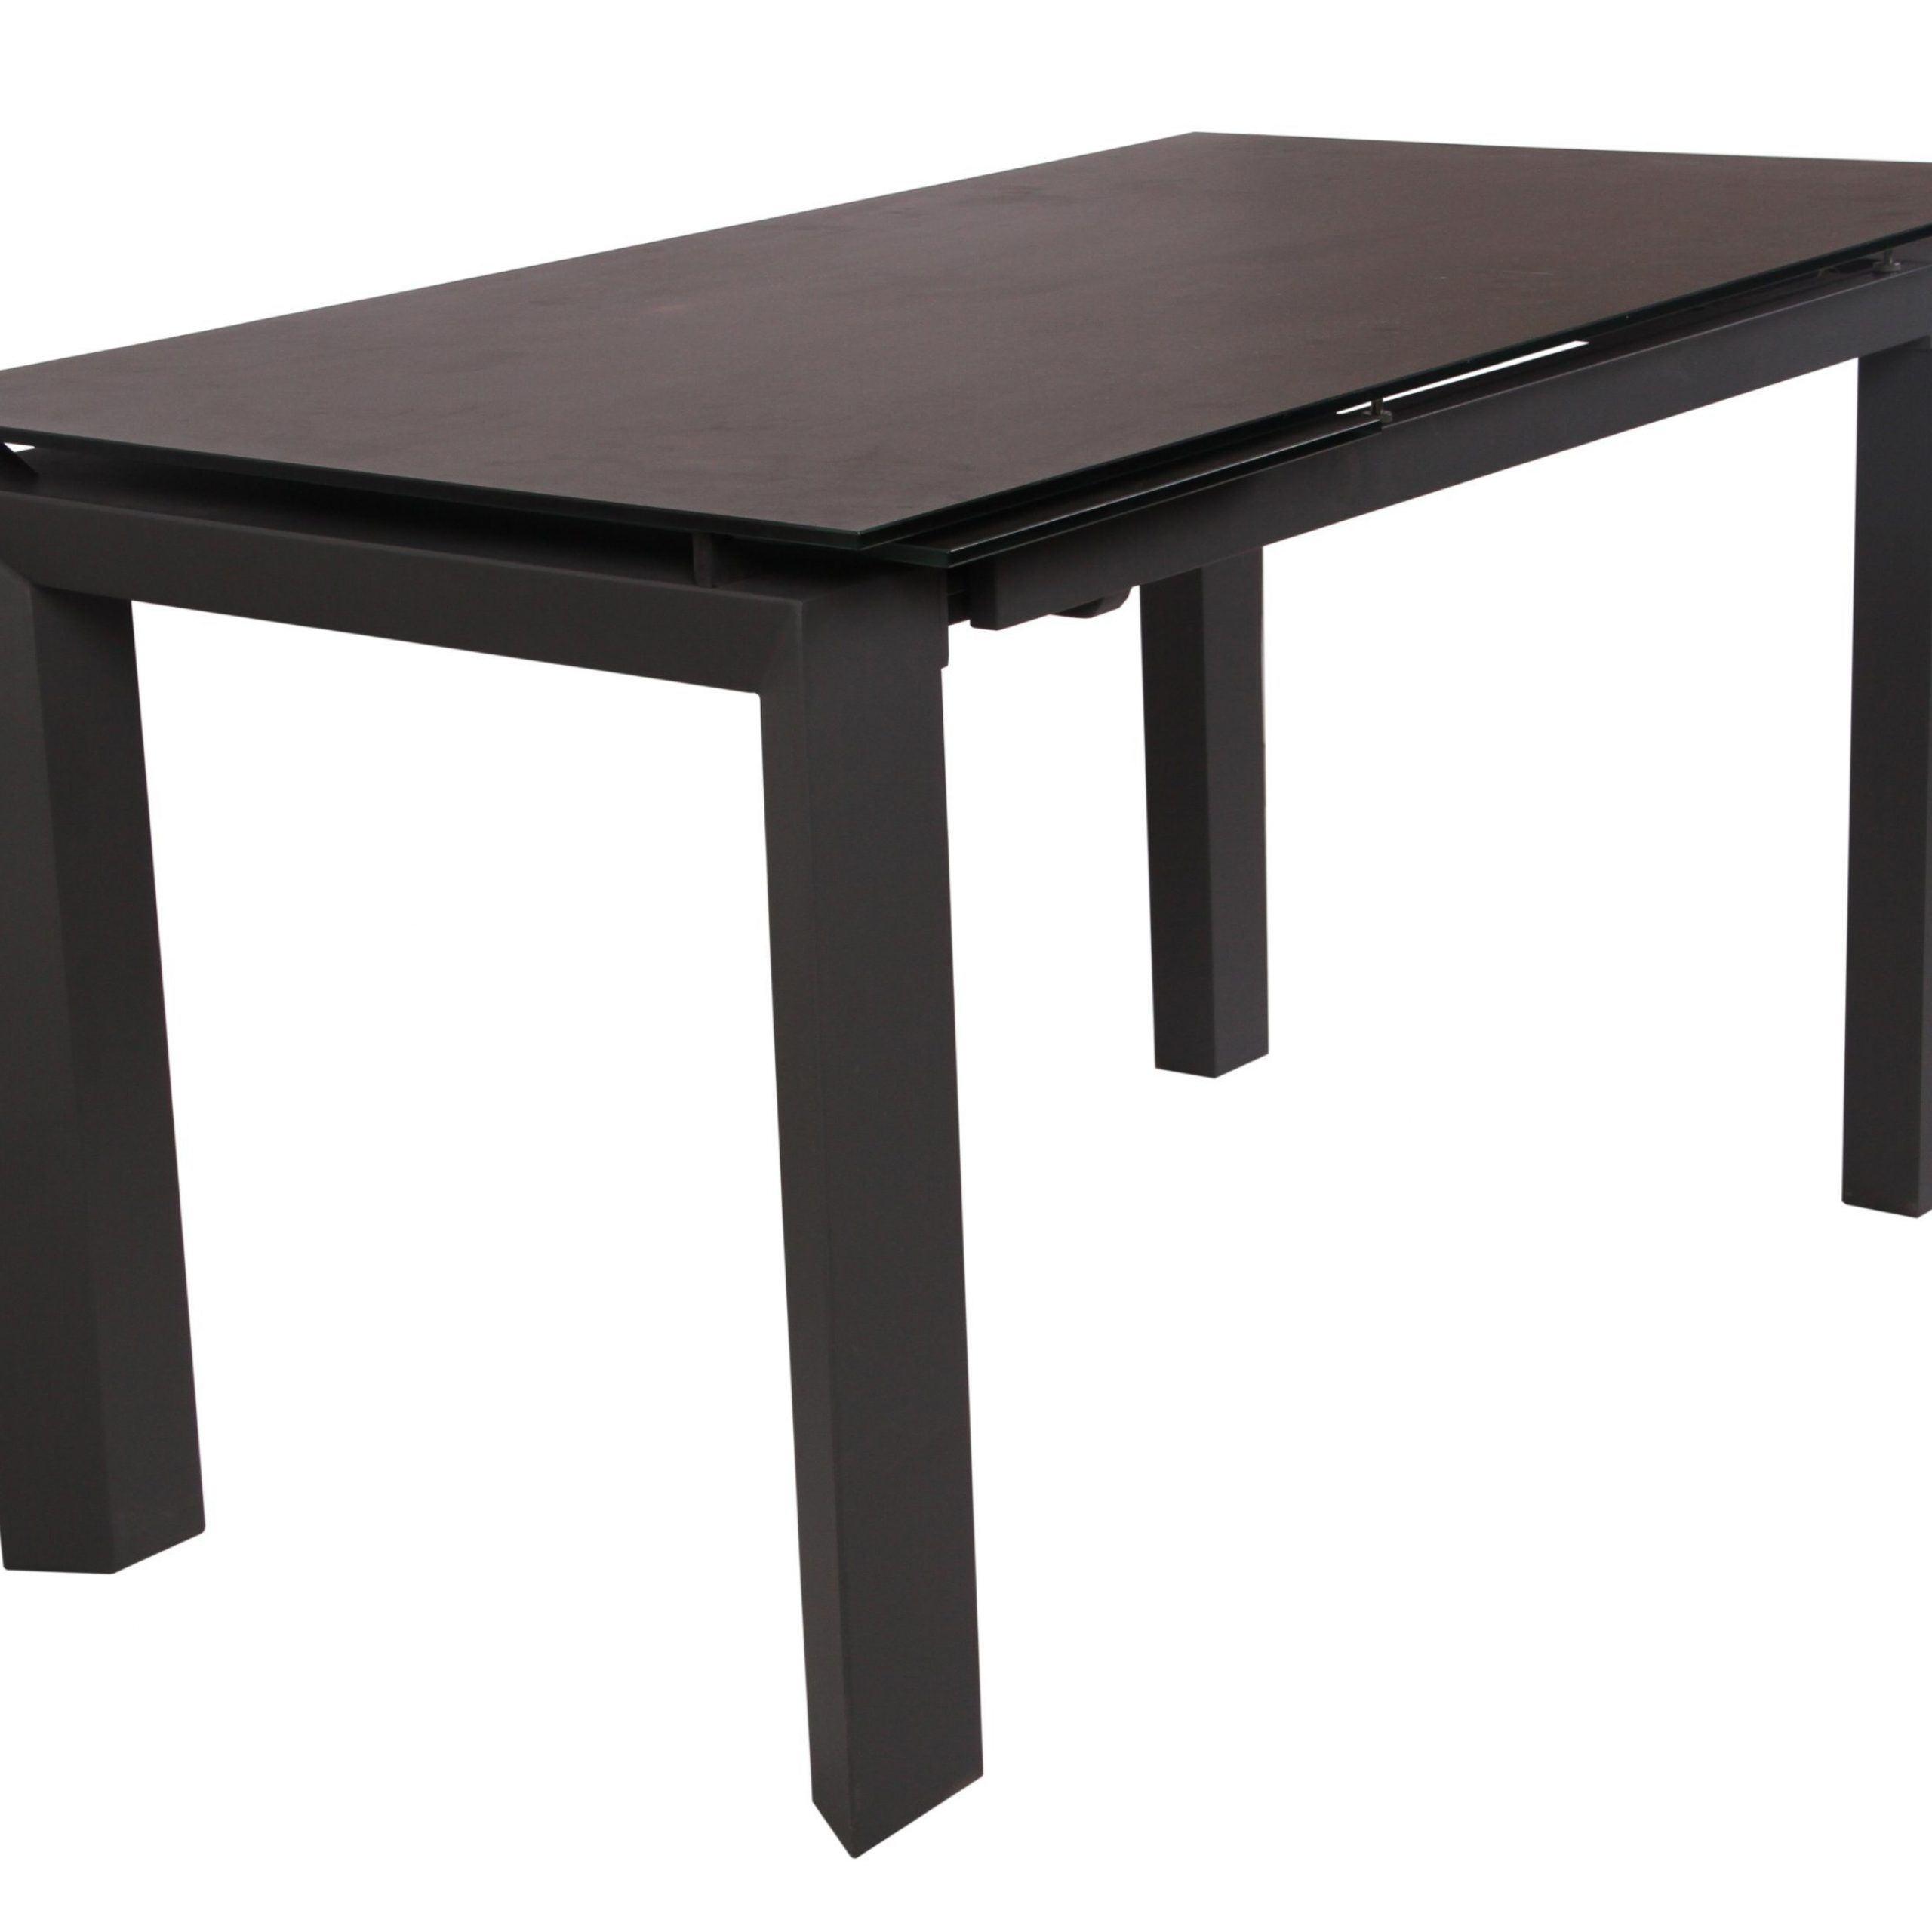 [%[hot Item] 10 15mm High Quality Iron Tempered Glass Dining Table Top With  Metal Leg In Most Popular Iron Wood Dining Tables With Metal Legs|iron Wood Dining Tables With Metal Legs In Well Known [hot Item] 10 15mm High Quality Iron Tempered Glass Dining Table Top With  Metal Leg|recent Iron Wood Dining Tables With Metal Legs Within [hot Item] 10 15mm High Quality Iron Tempered Glass Dining Table Top With  Metal Leg|most Recent [hot Item] 10 15mm High Quality Iron Tempered Glass Dining Table Top With  Metal Leg Within Iron Wood Dining Tables With Metal Legs%] (Photo 12 of 25)